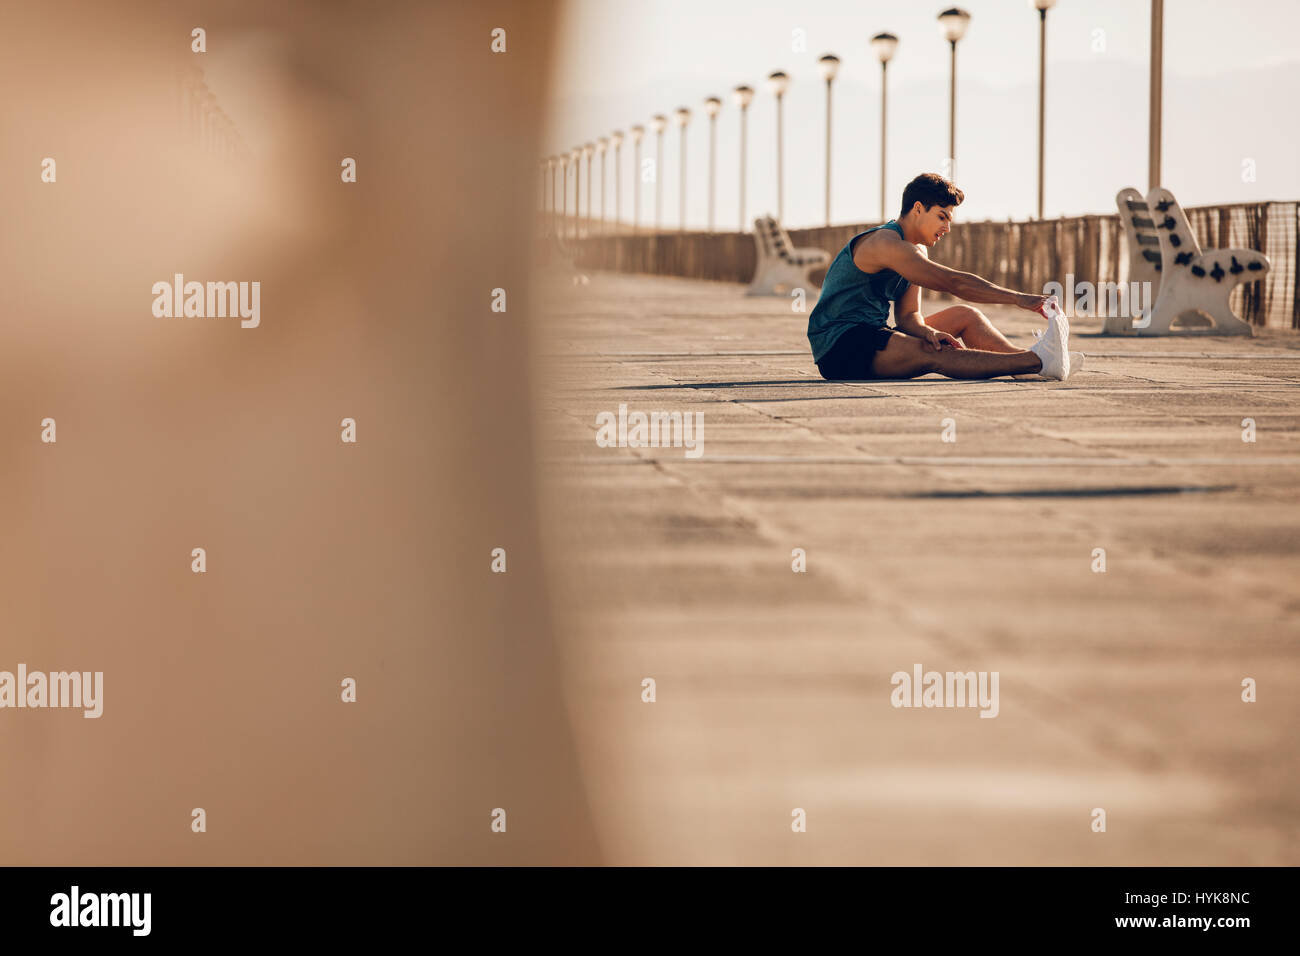 Shot of healthy young man taking a break running session. Male runner stretching legs after running on promenade. Stock Photo